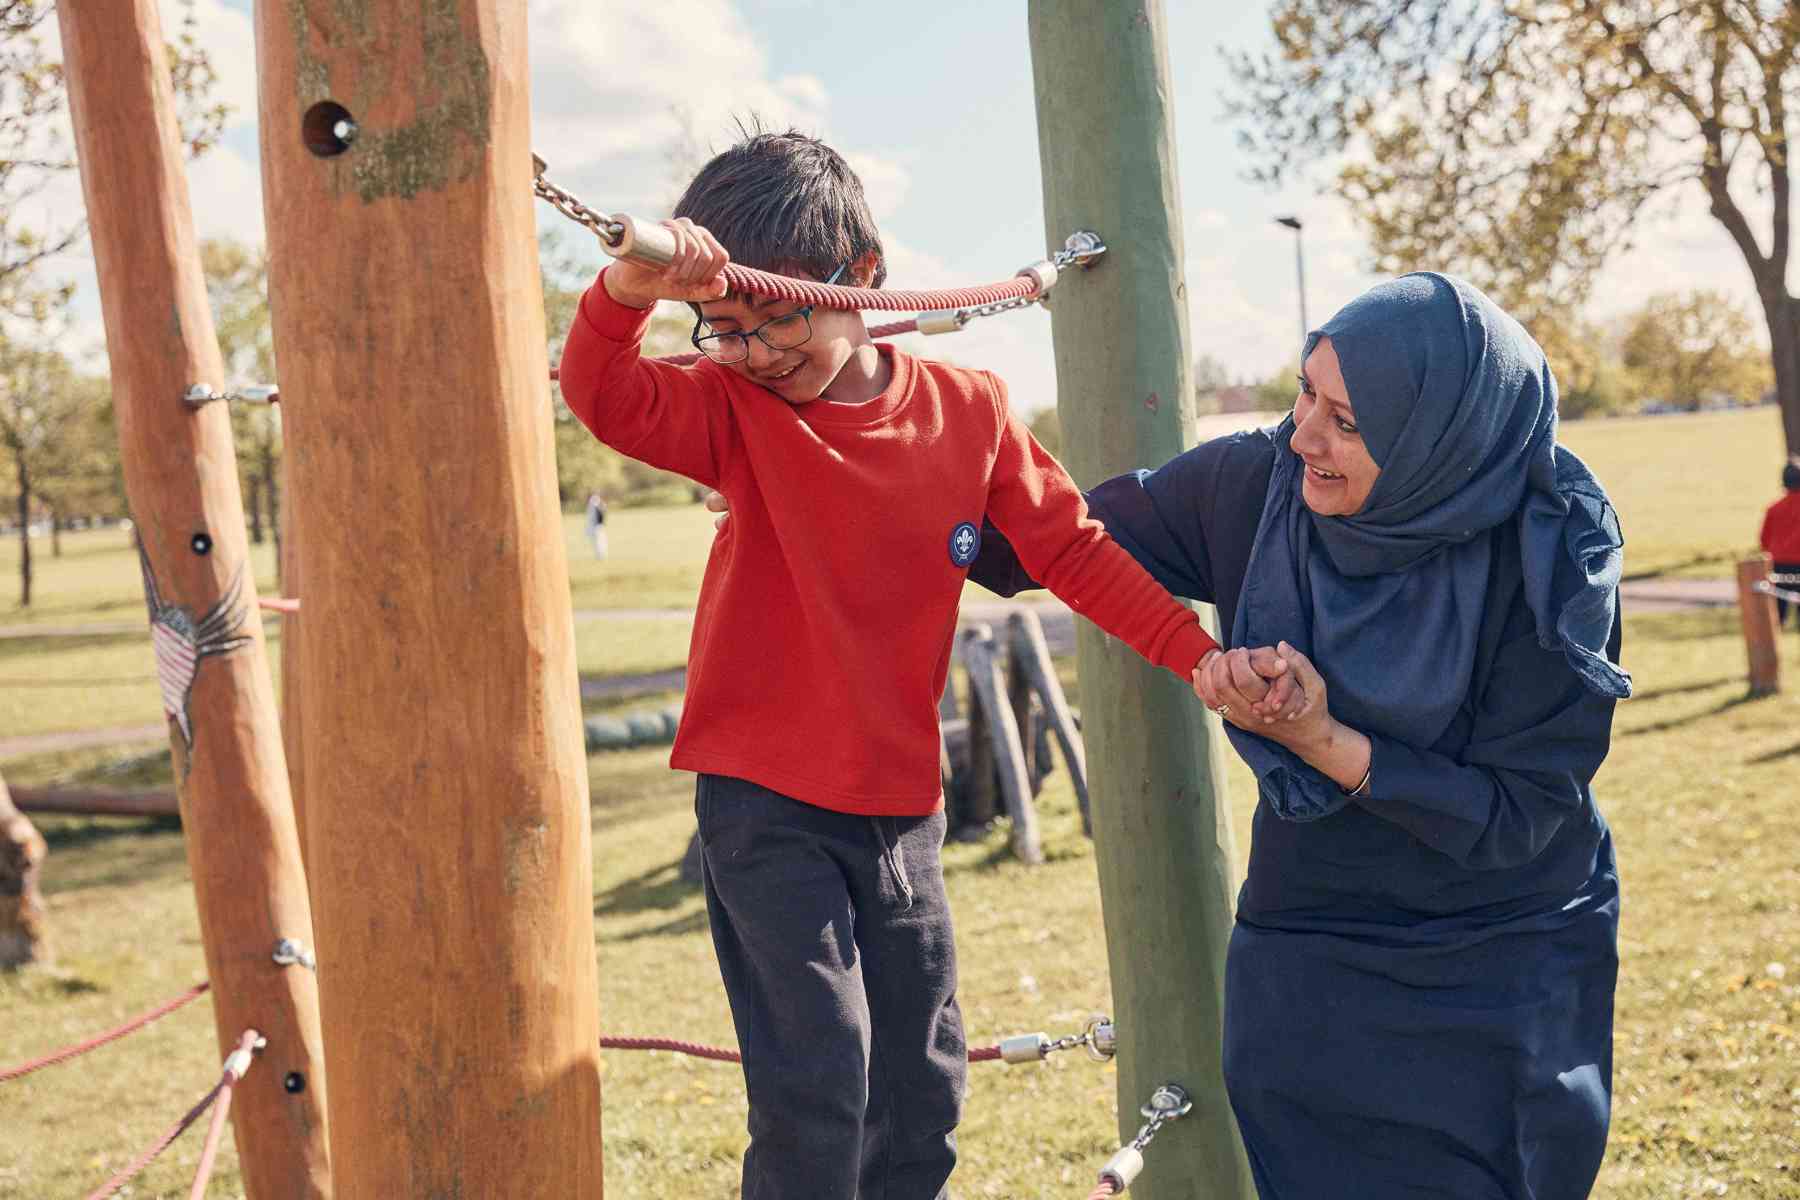 A Squirrel, wearing a red jumper, walks on a climbing frame while holding the hand of a leader.